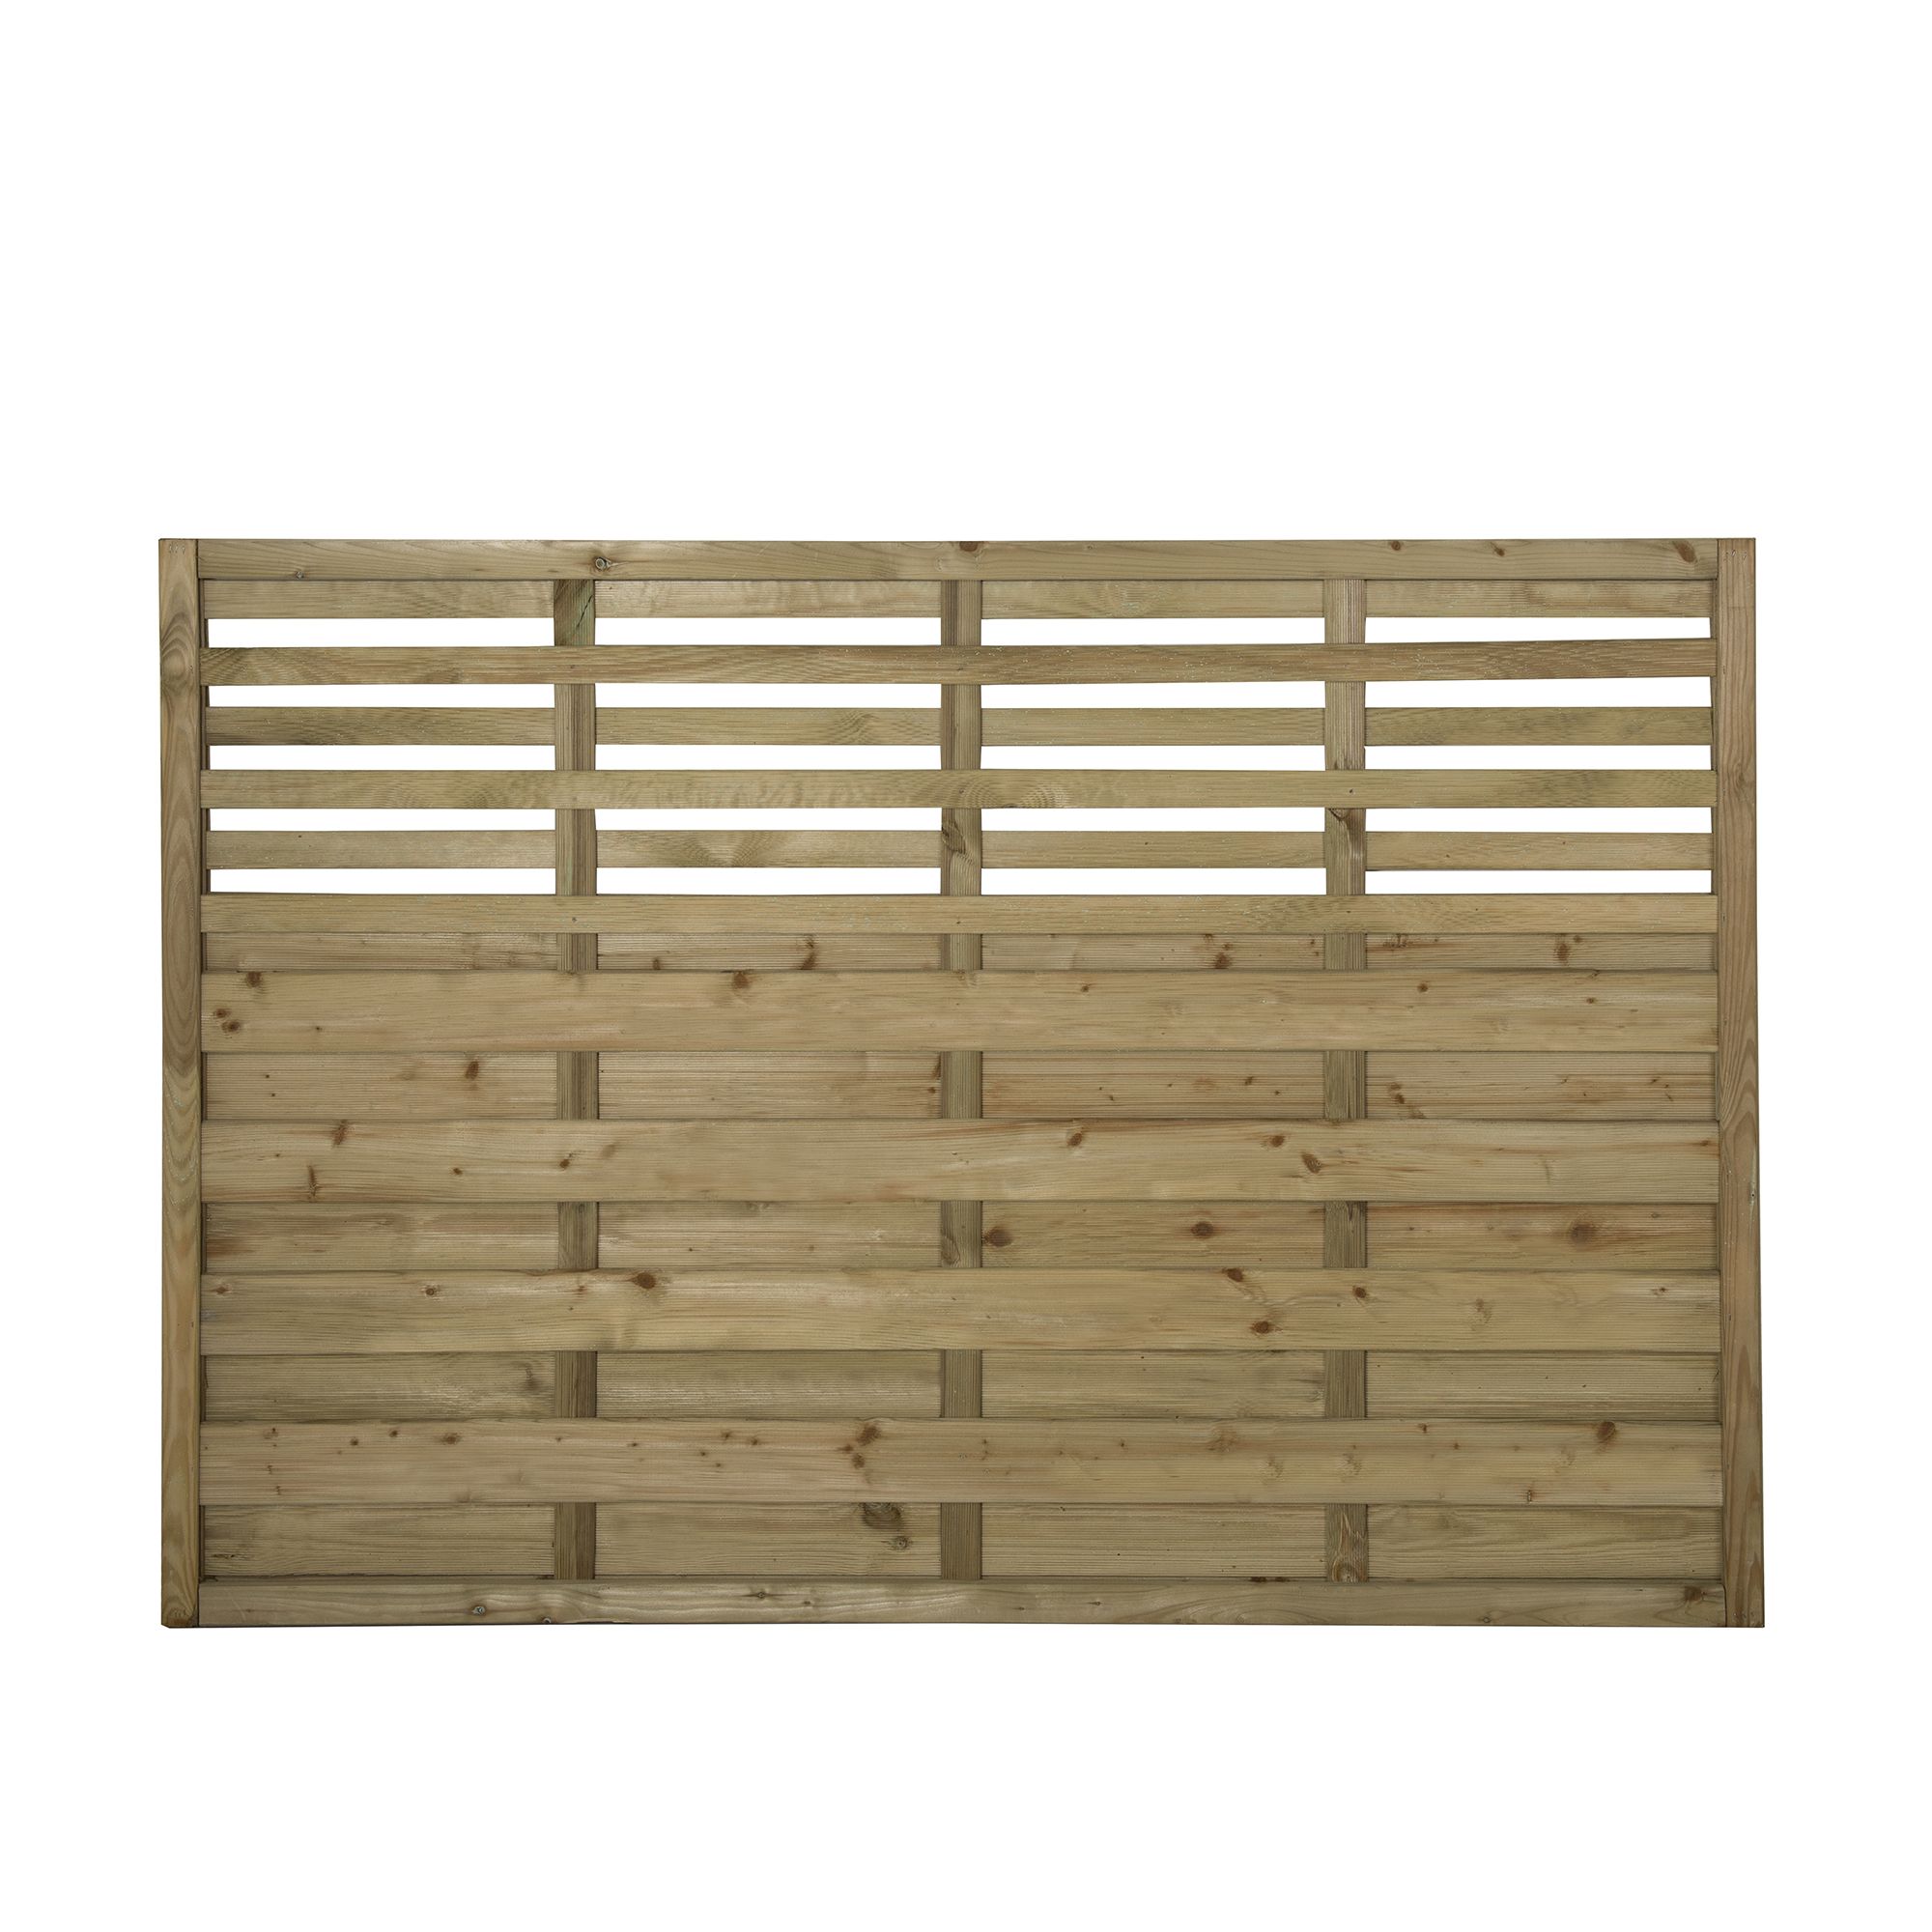 Forest Garden Contemporary Slatted Pressure treated 4ft Wooden Fence panel (W)1.8m (H)1.2m, Pack of 4